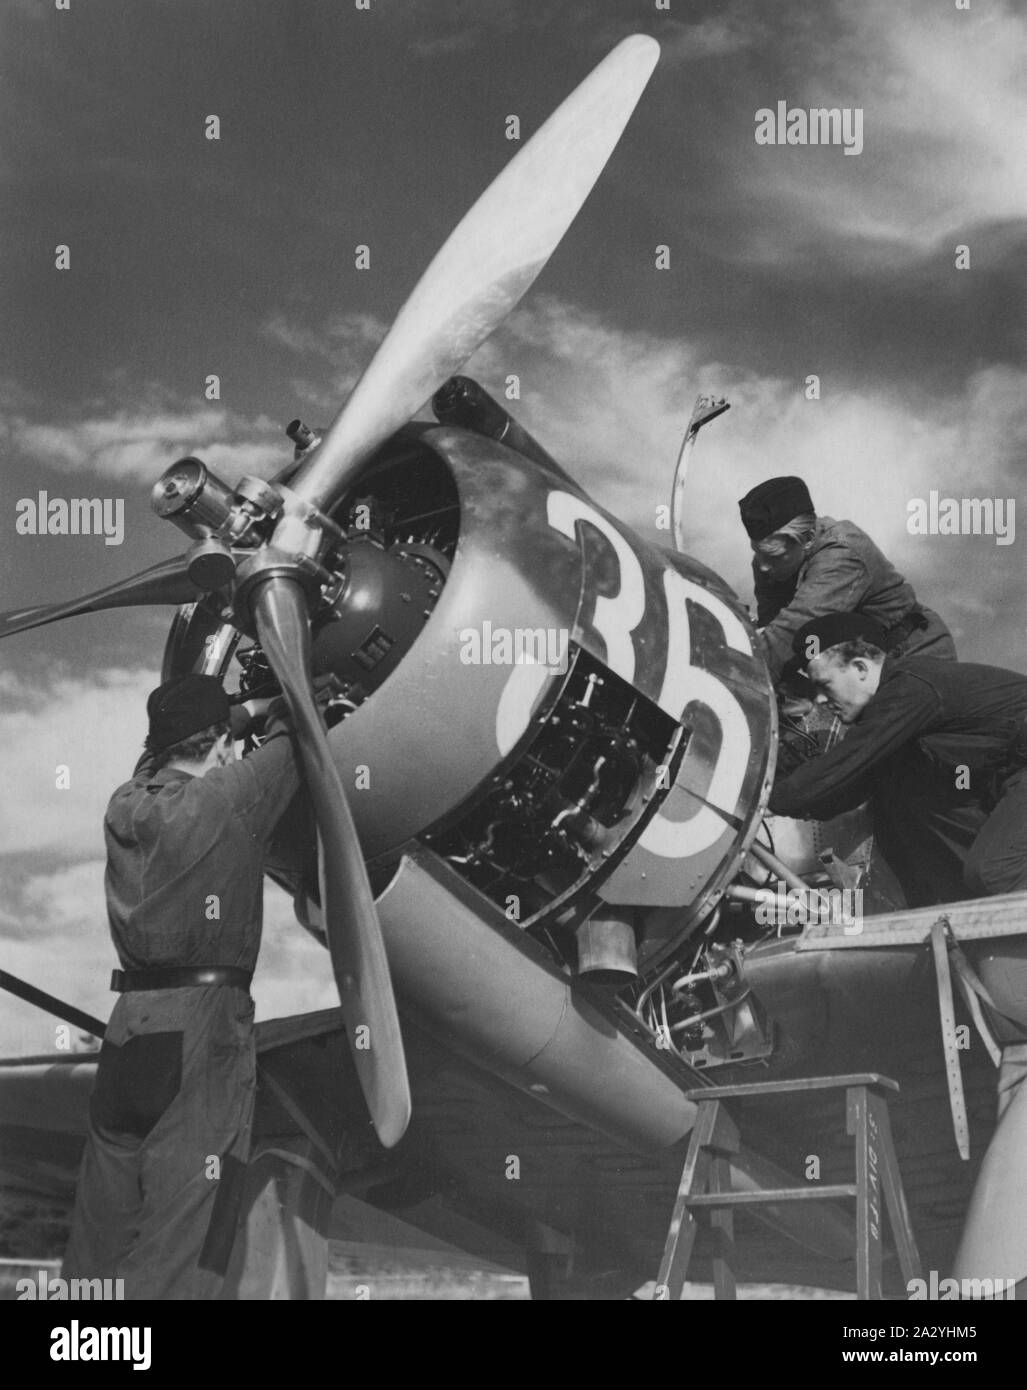 Airplane engineers.Three mechanics are performing the important last minute check of engine details before start. The airplane is a swedish single propeller engine light bomb and survaillance unit model B5. The swedish company Saab Svenska Aeroplan AB produced this airplane on license from American Northrop and their model 8A-1.  Picture taken in the 1940s during the second world war. Stock Photo